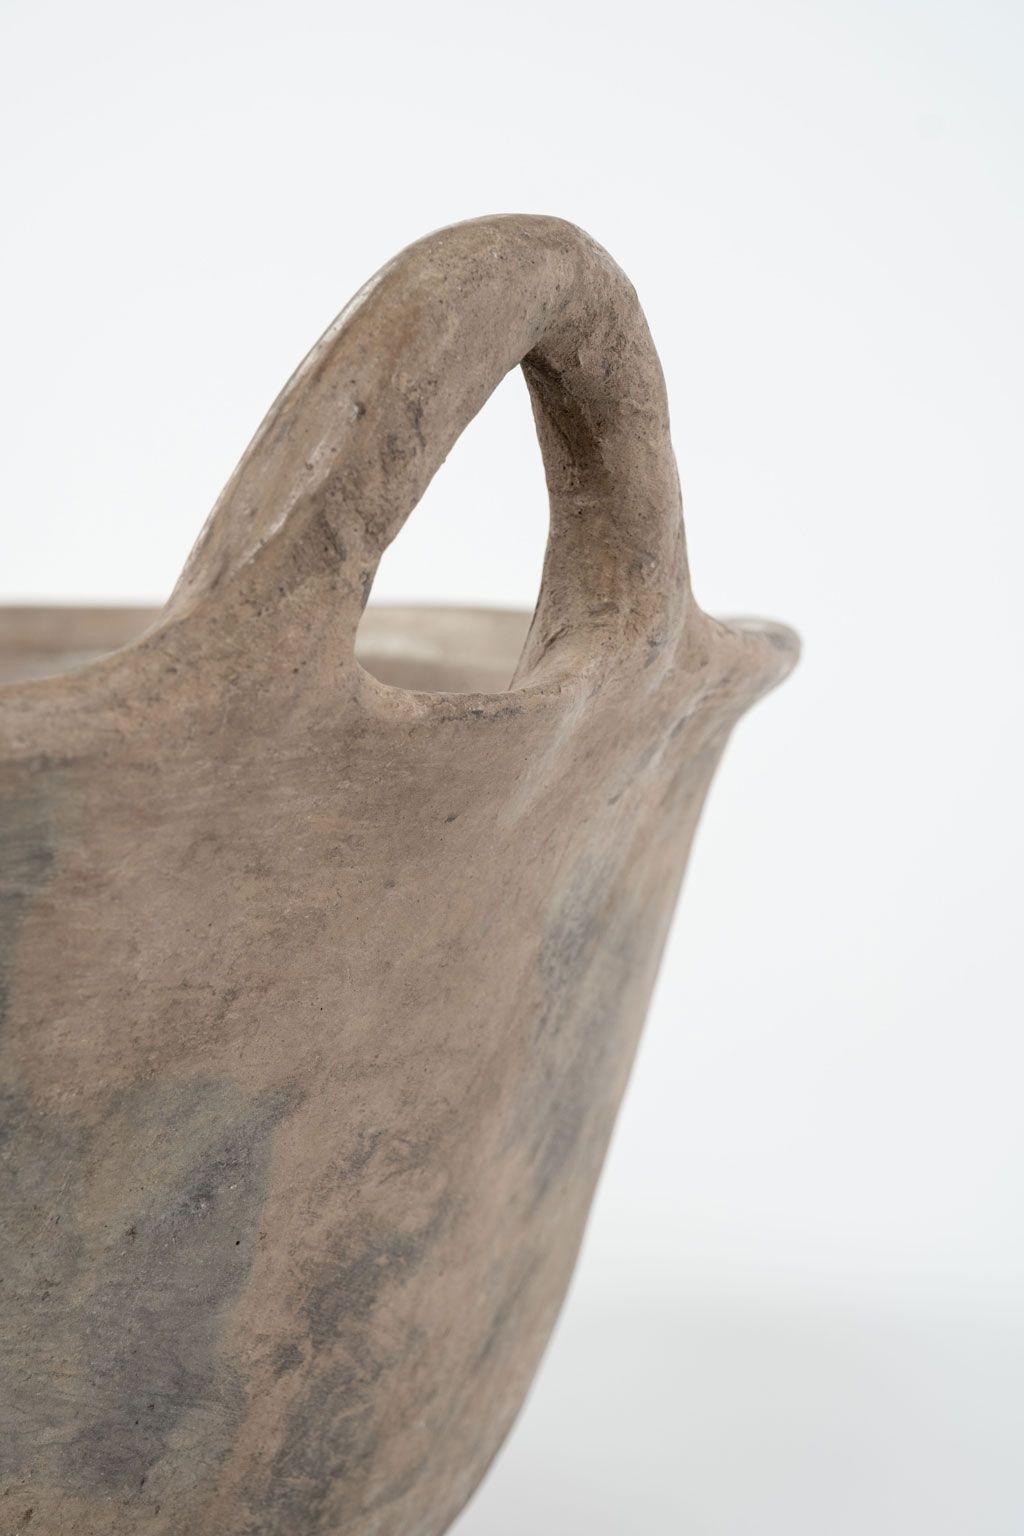 Primitive clay cooking bowl from Los Reyes Metzontla, Mexico. This vintage vessel is hand-sculpted, created and used circa 1950-1969 by the indigenous population of the isolated Mexican highlands of Puebla (Zapotitlán). Exhibiting a nice rich